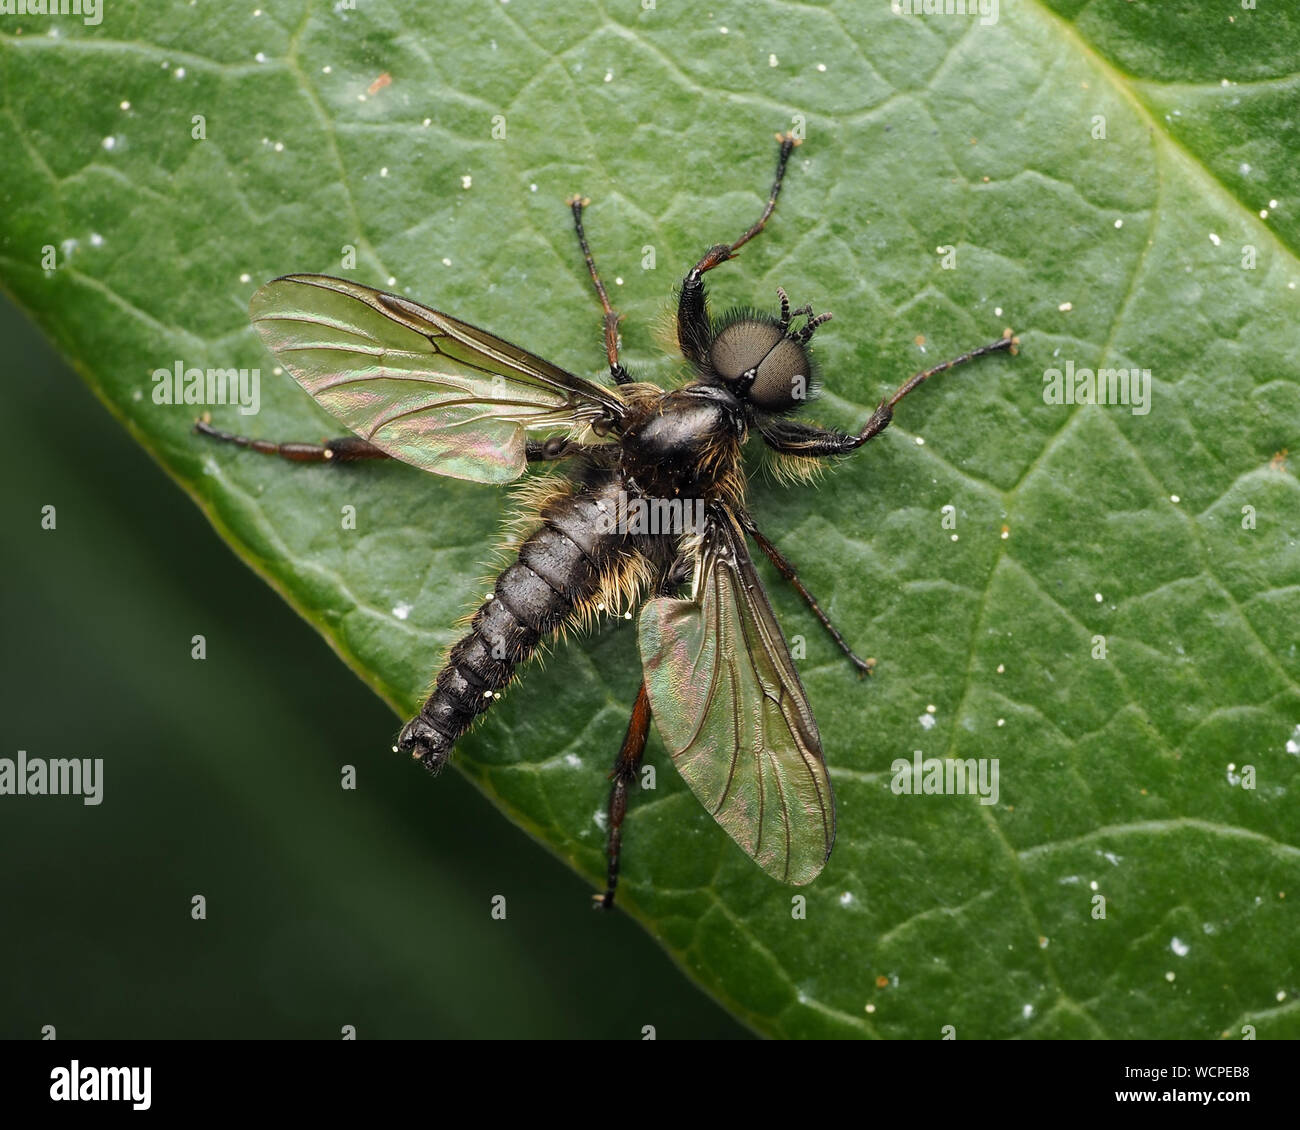 Dorsal view of Bibio sp fly resting on rhododendron. Tipperary, Ireland Stock Photo